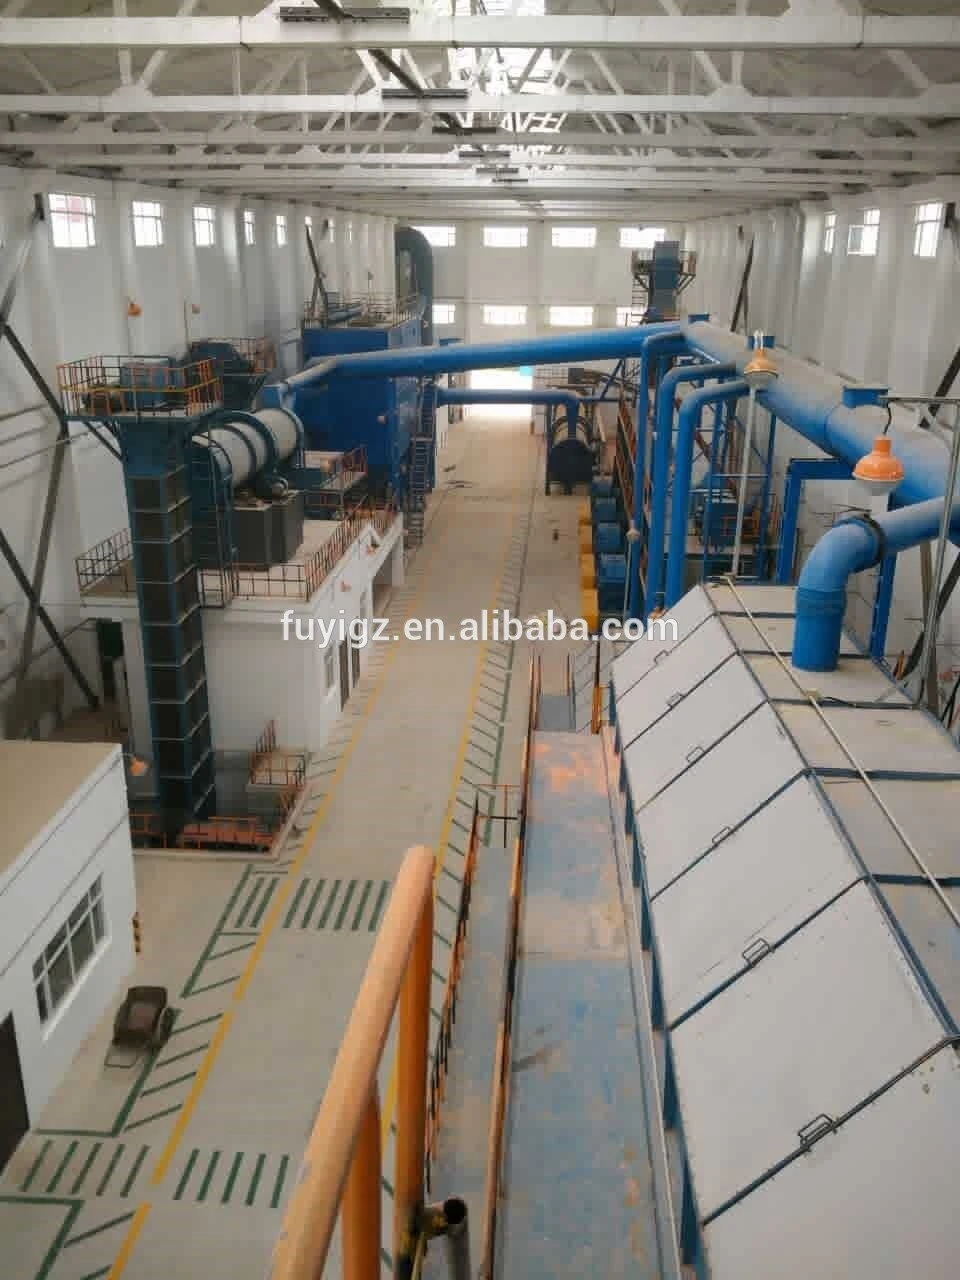 Double roller extrusion granulator for bentonite clay cat litter